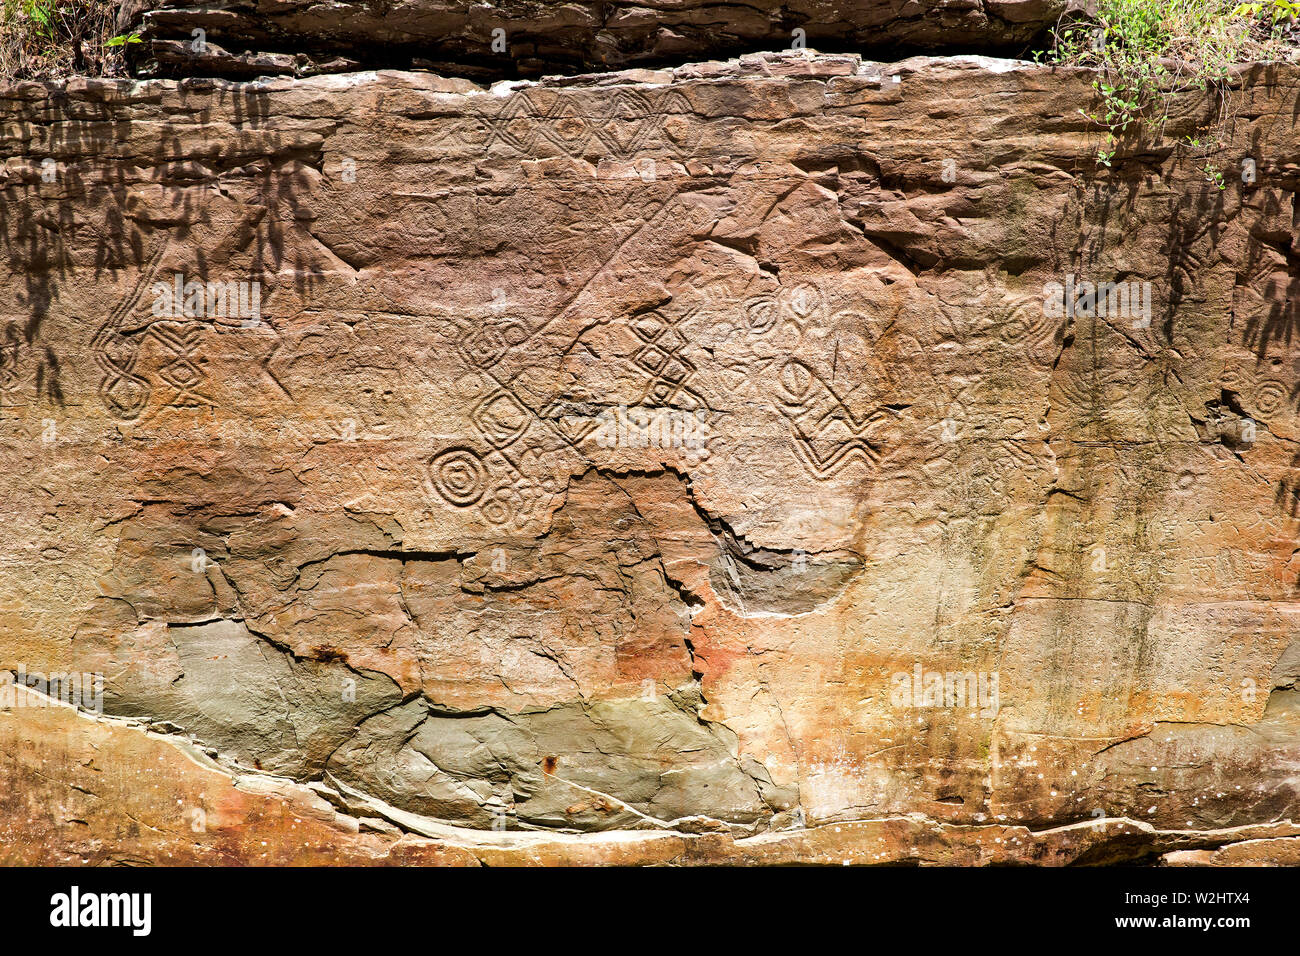 Pictures and inscriptions on the rock wall at the foot of Naegokcheon Stream, Dudong-ri, Ulju-gun, Ulsan, Korea Stock Photo